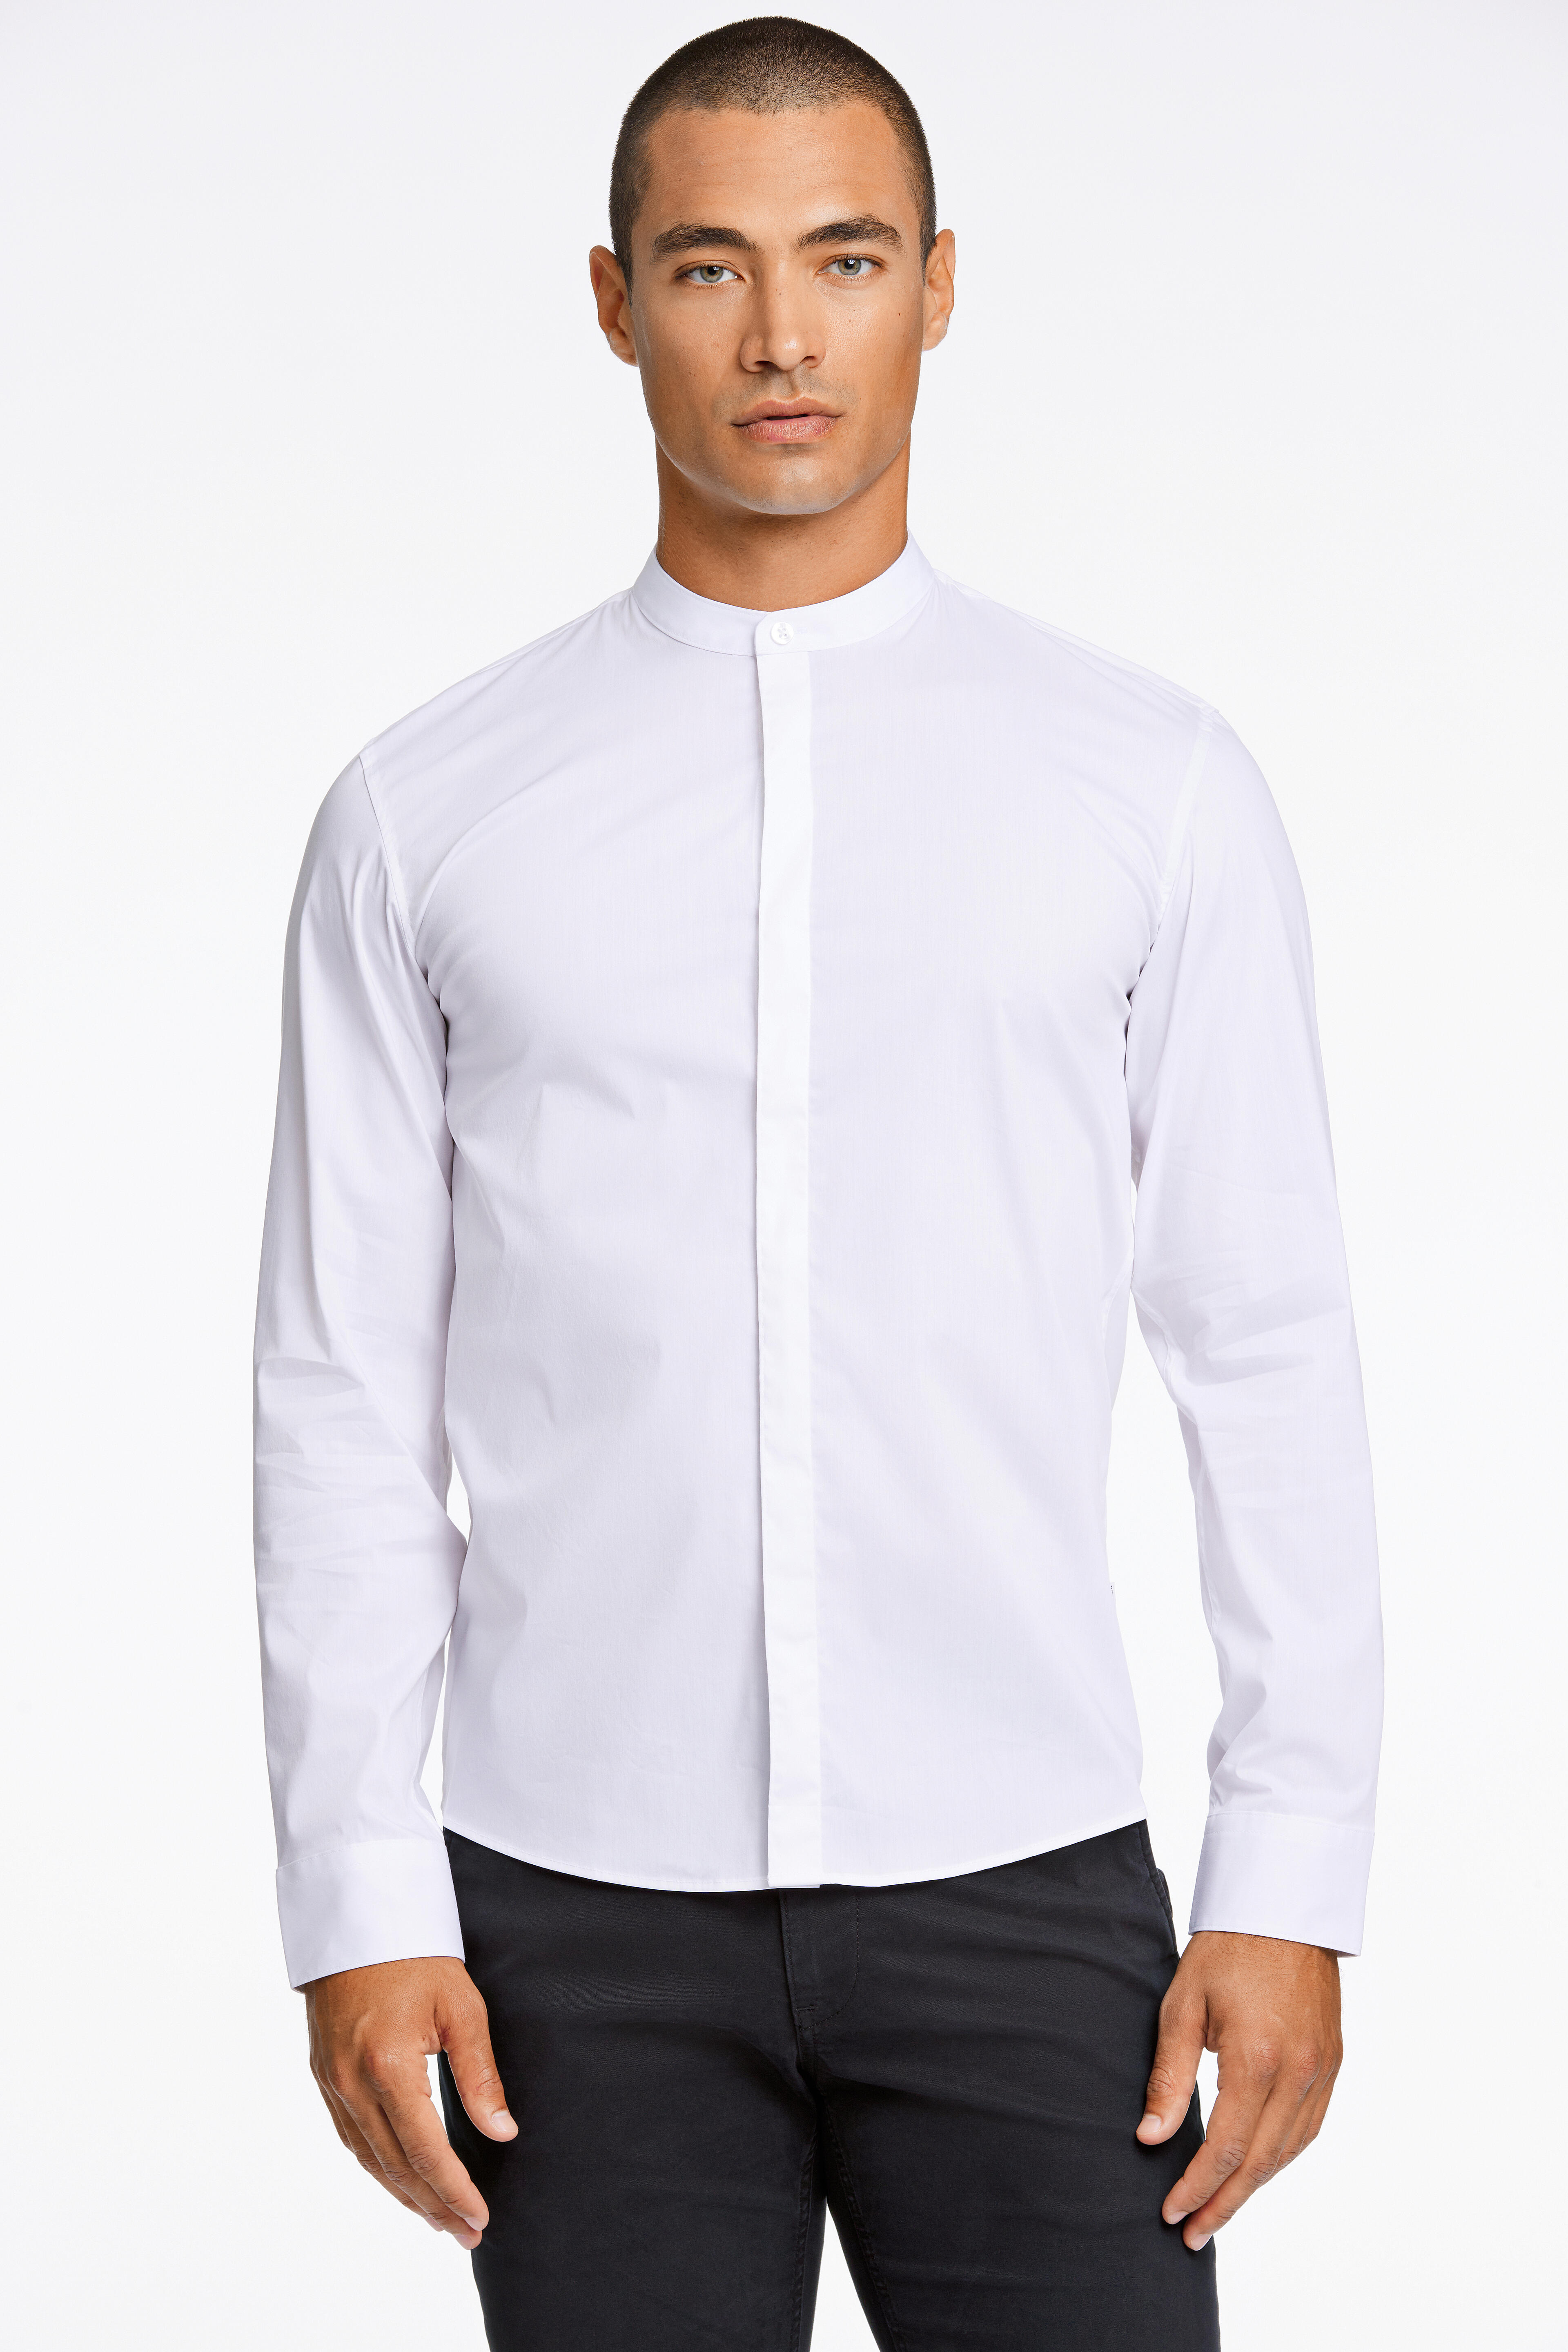 Business casual shirt | Slim fit